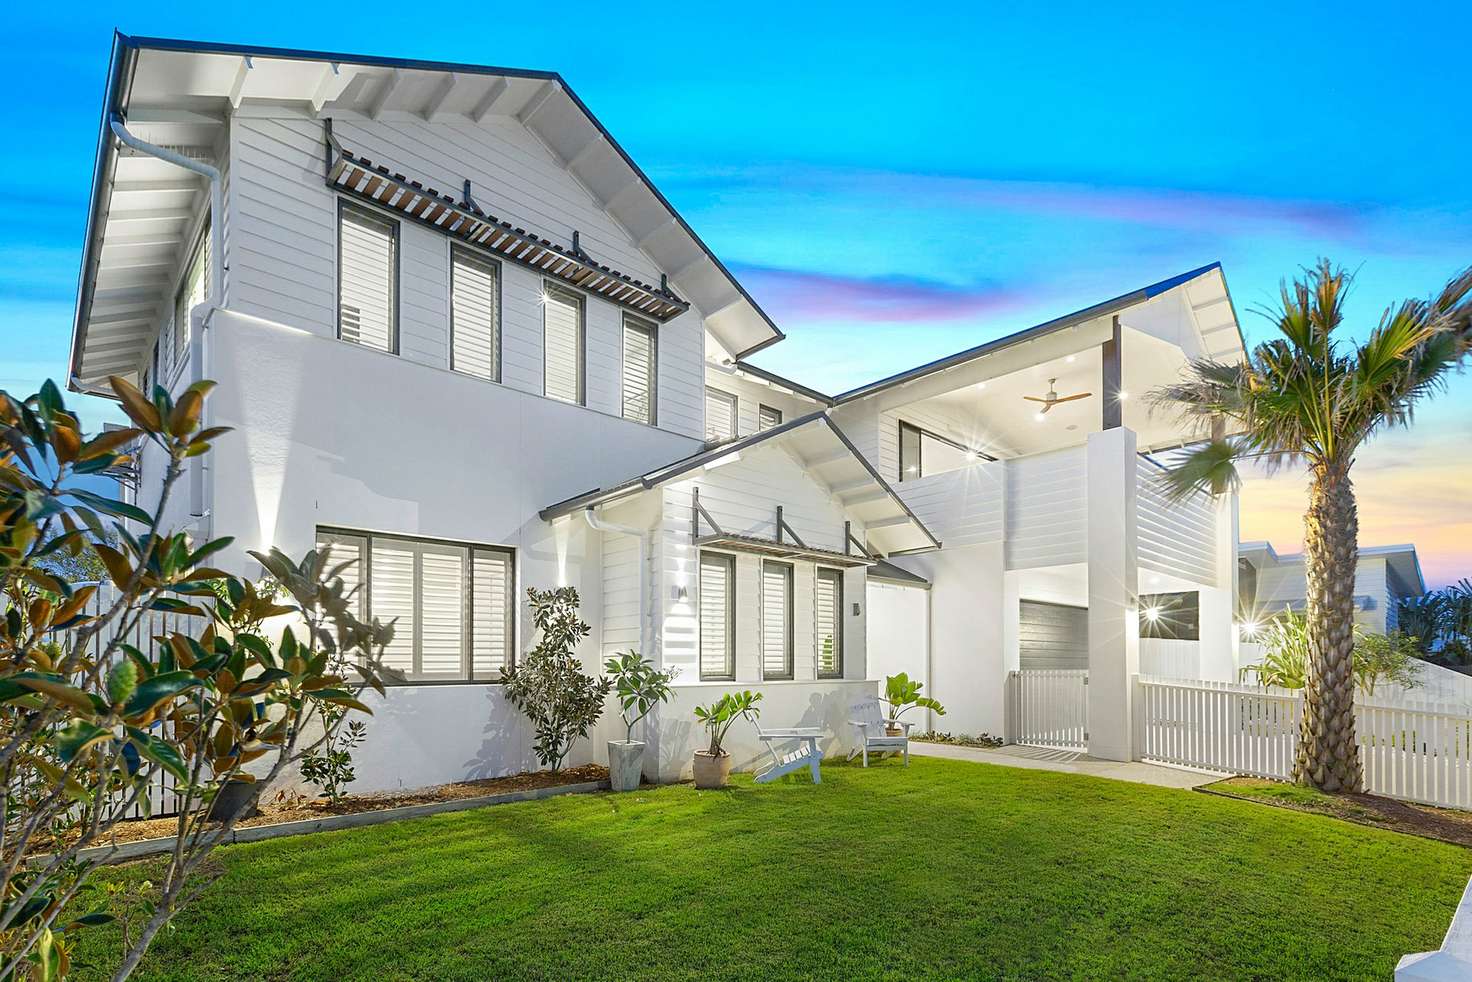 Main view of Homely house listing, 56 Sailfish Way, Kingscliff NSW 2487